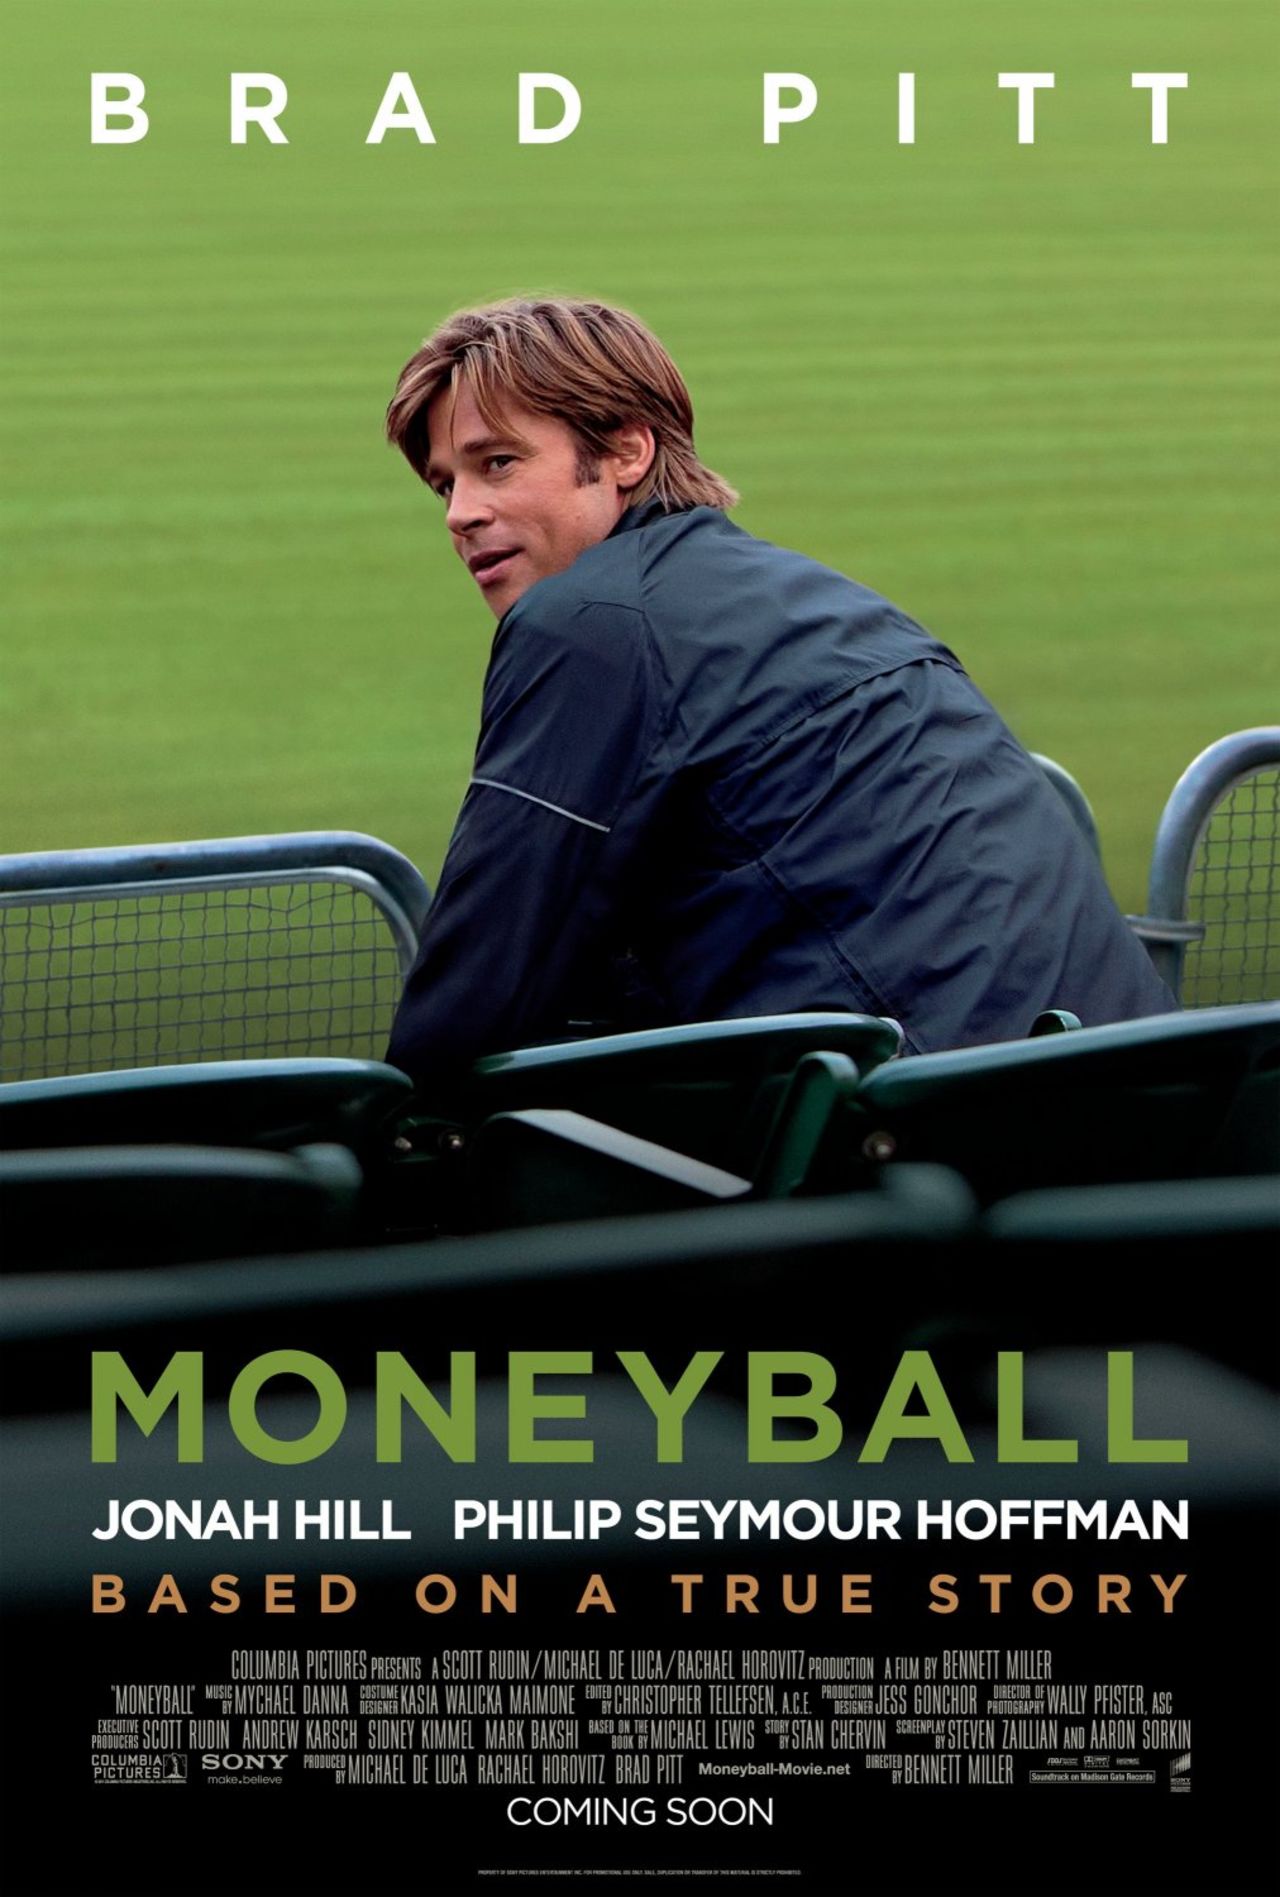 Big business taking tips from the sports industry? Billy Beane, author of MoneyBall and played by Brad Pitt in the film, used statistical information to revolutionize the game of Baseball, now major firms across the world are also looking to score big. By mindfully collecting and analyzing data, businesses can expect to improve their strategy and elevate profits. 